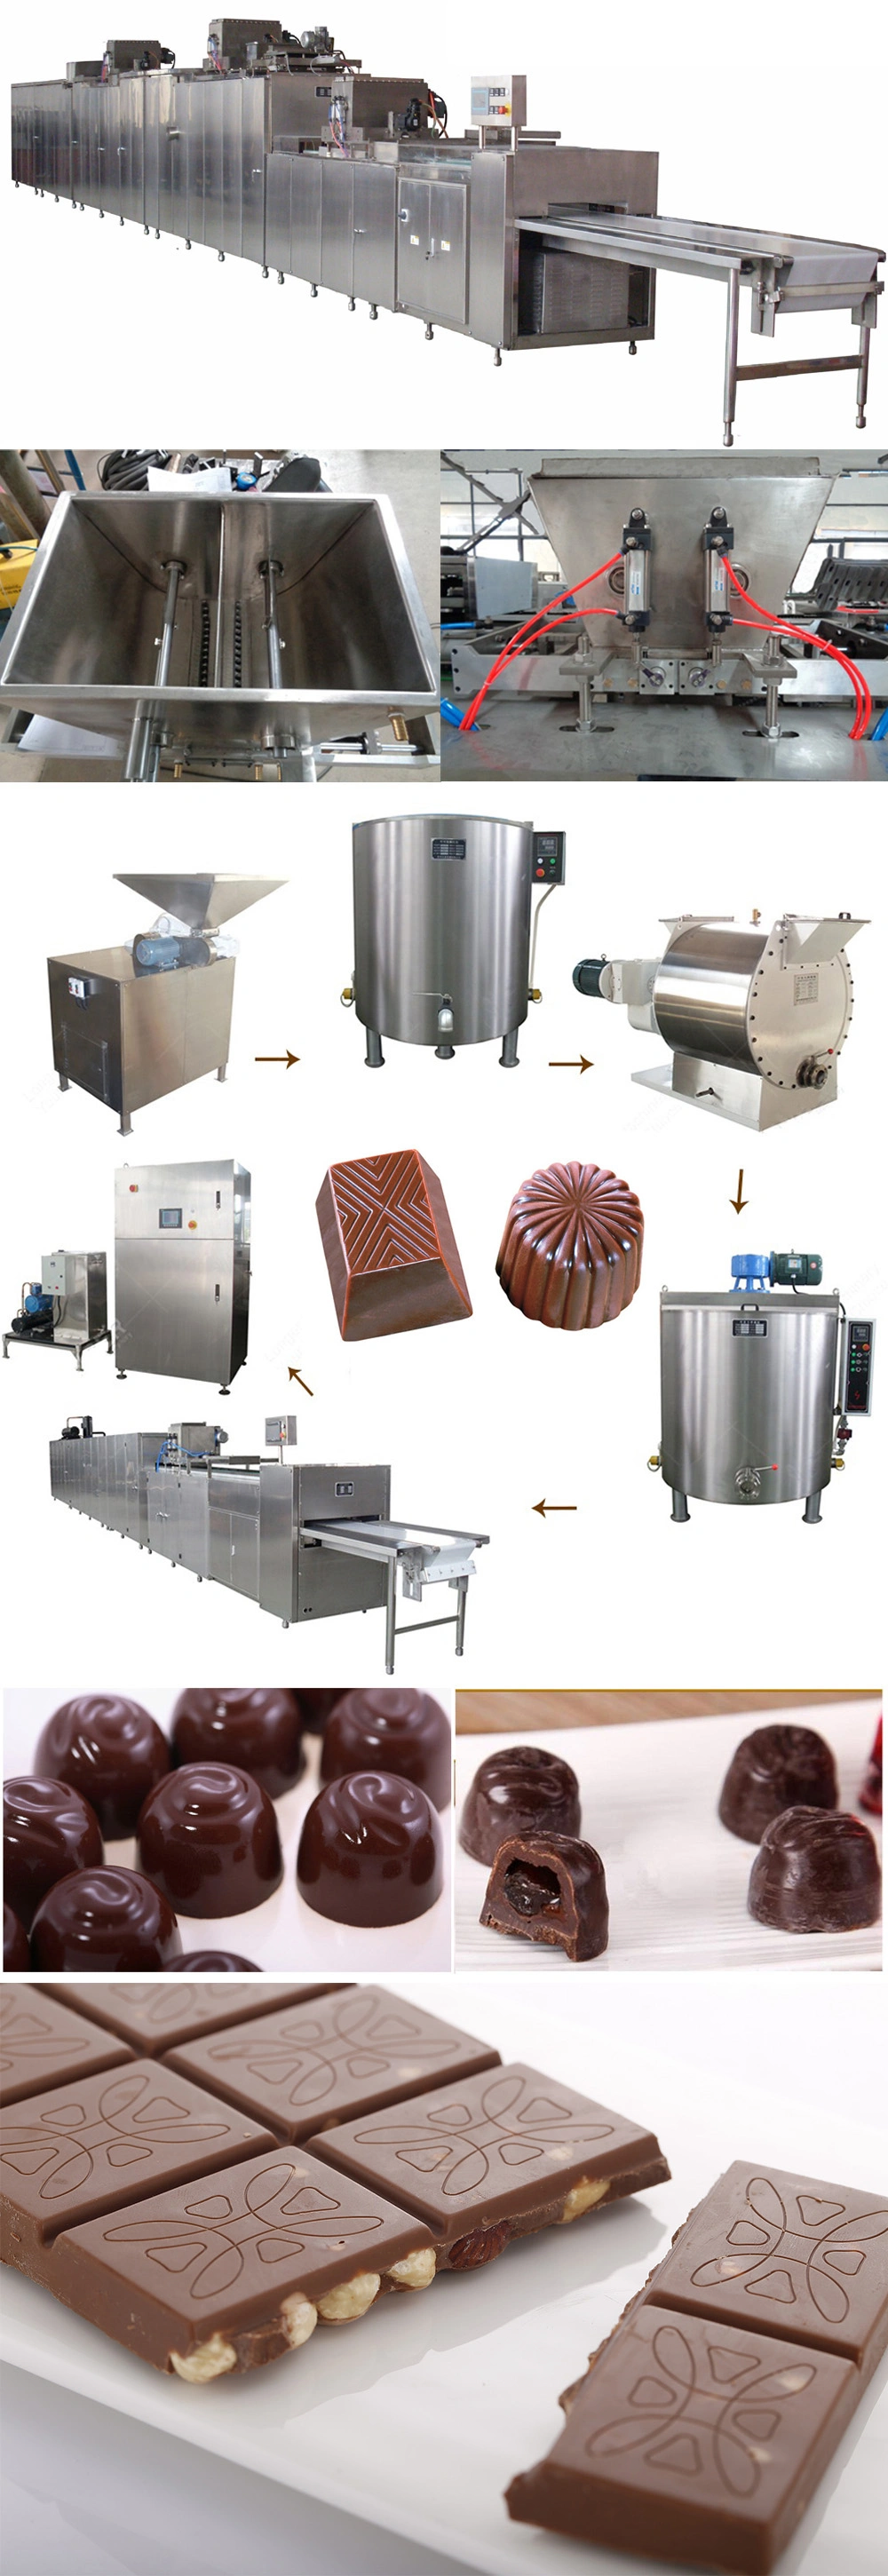 mm Beans Production Line Chocolate Ball Milling Machine Chocolate Conche and Refining Machine Chocolate Production Line